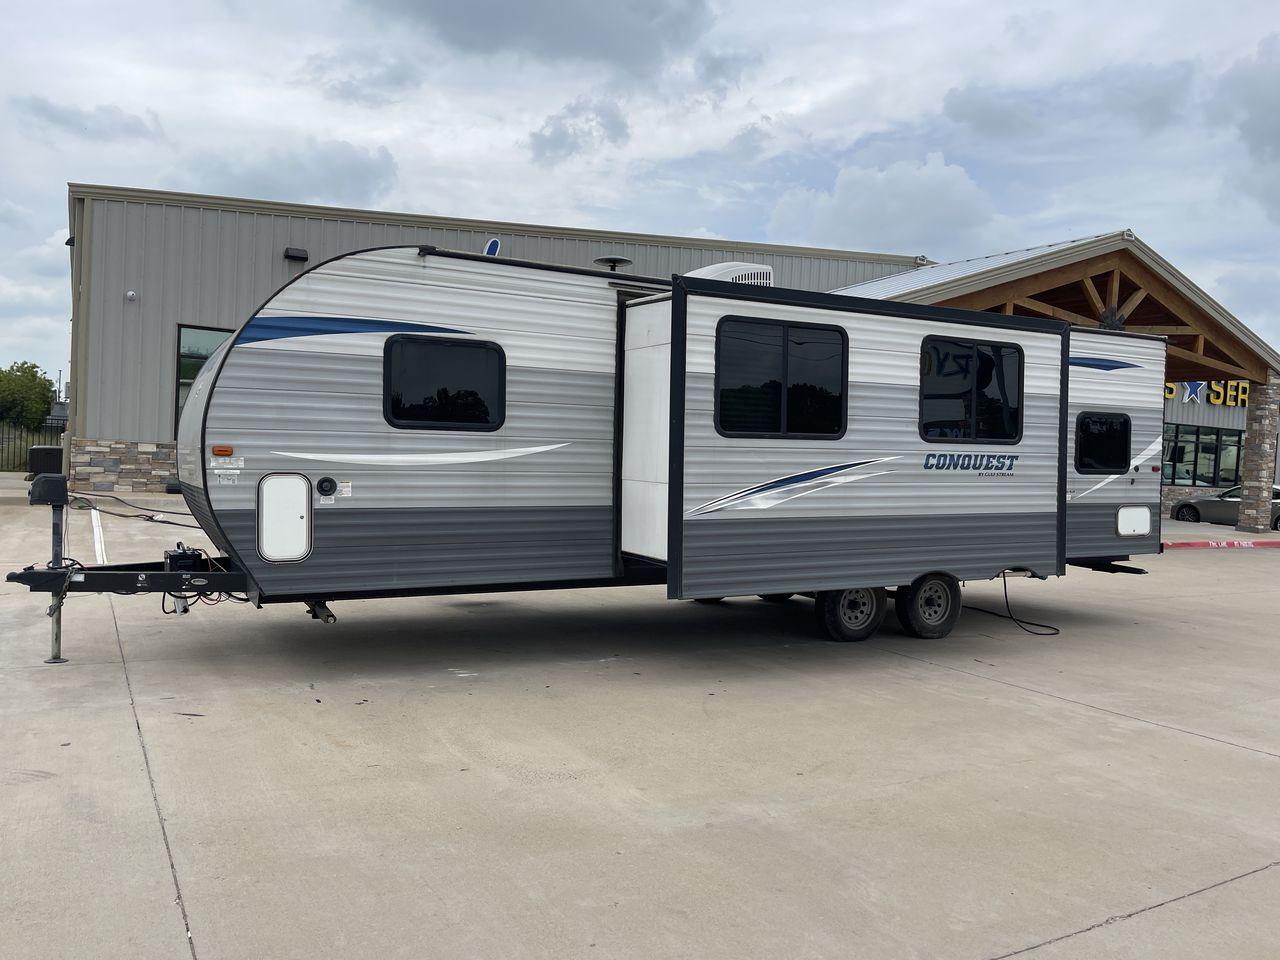 2019 GULF STREAM CONQUEST 274QB (1NL1G3226K1) , Length: 32.25 ft. | Dry Weight: 6,230 lbs. | Slides: 1 transmission, located at 4319 N Main Street, Cleburne, TX, 76033, (817) 221-0660, 32.435829, -97.384178 - The 2019 Gulf Stream 274QB is a dual-axle steel-wheel set-up that measures 32.25 ft. in length. It has a dry weight of 6,230 lbs. and a payload capacity of 1,918 lbs. It has automatic heating and cooling rated at 16,000 and 13,500 BTUs, respectively. It is also equipped with one power slide and a po - Photo #25